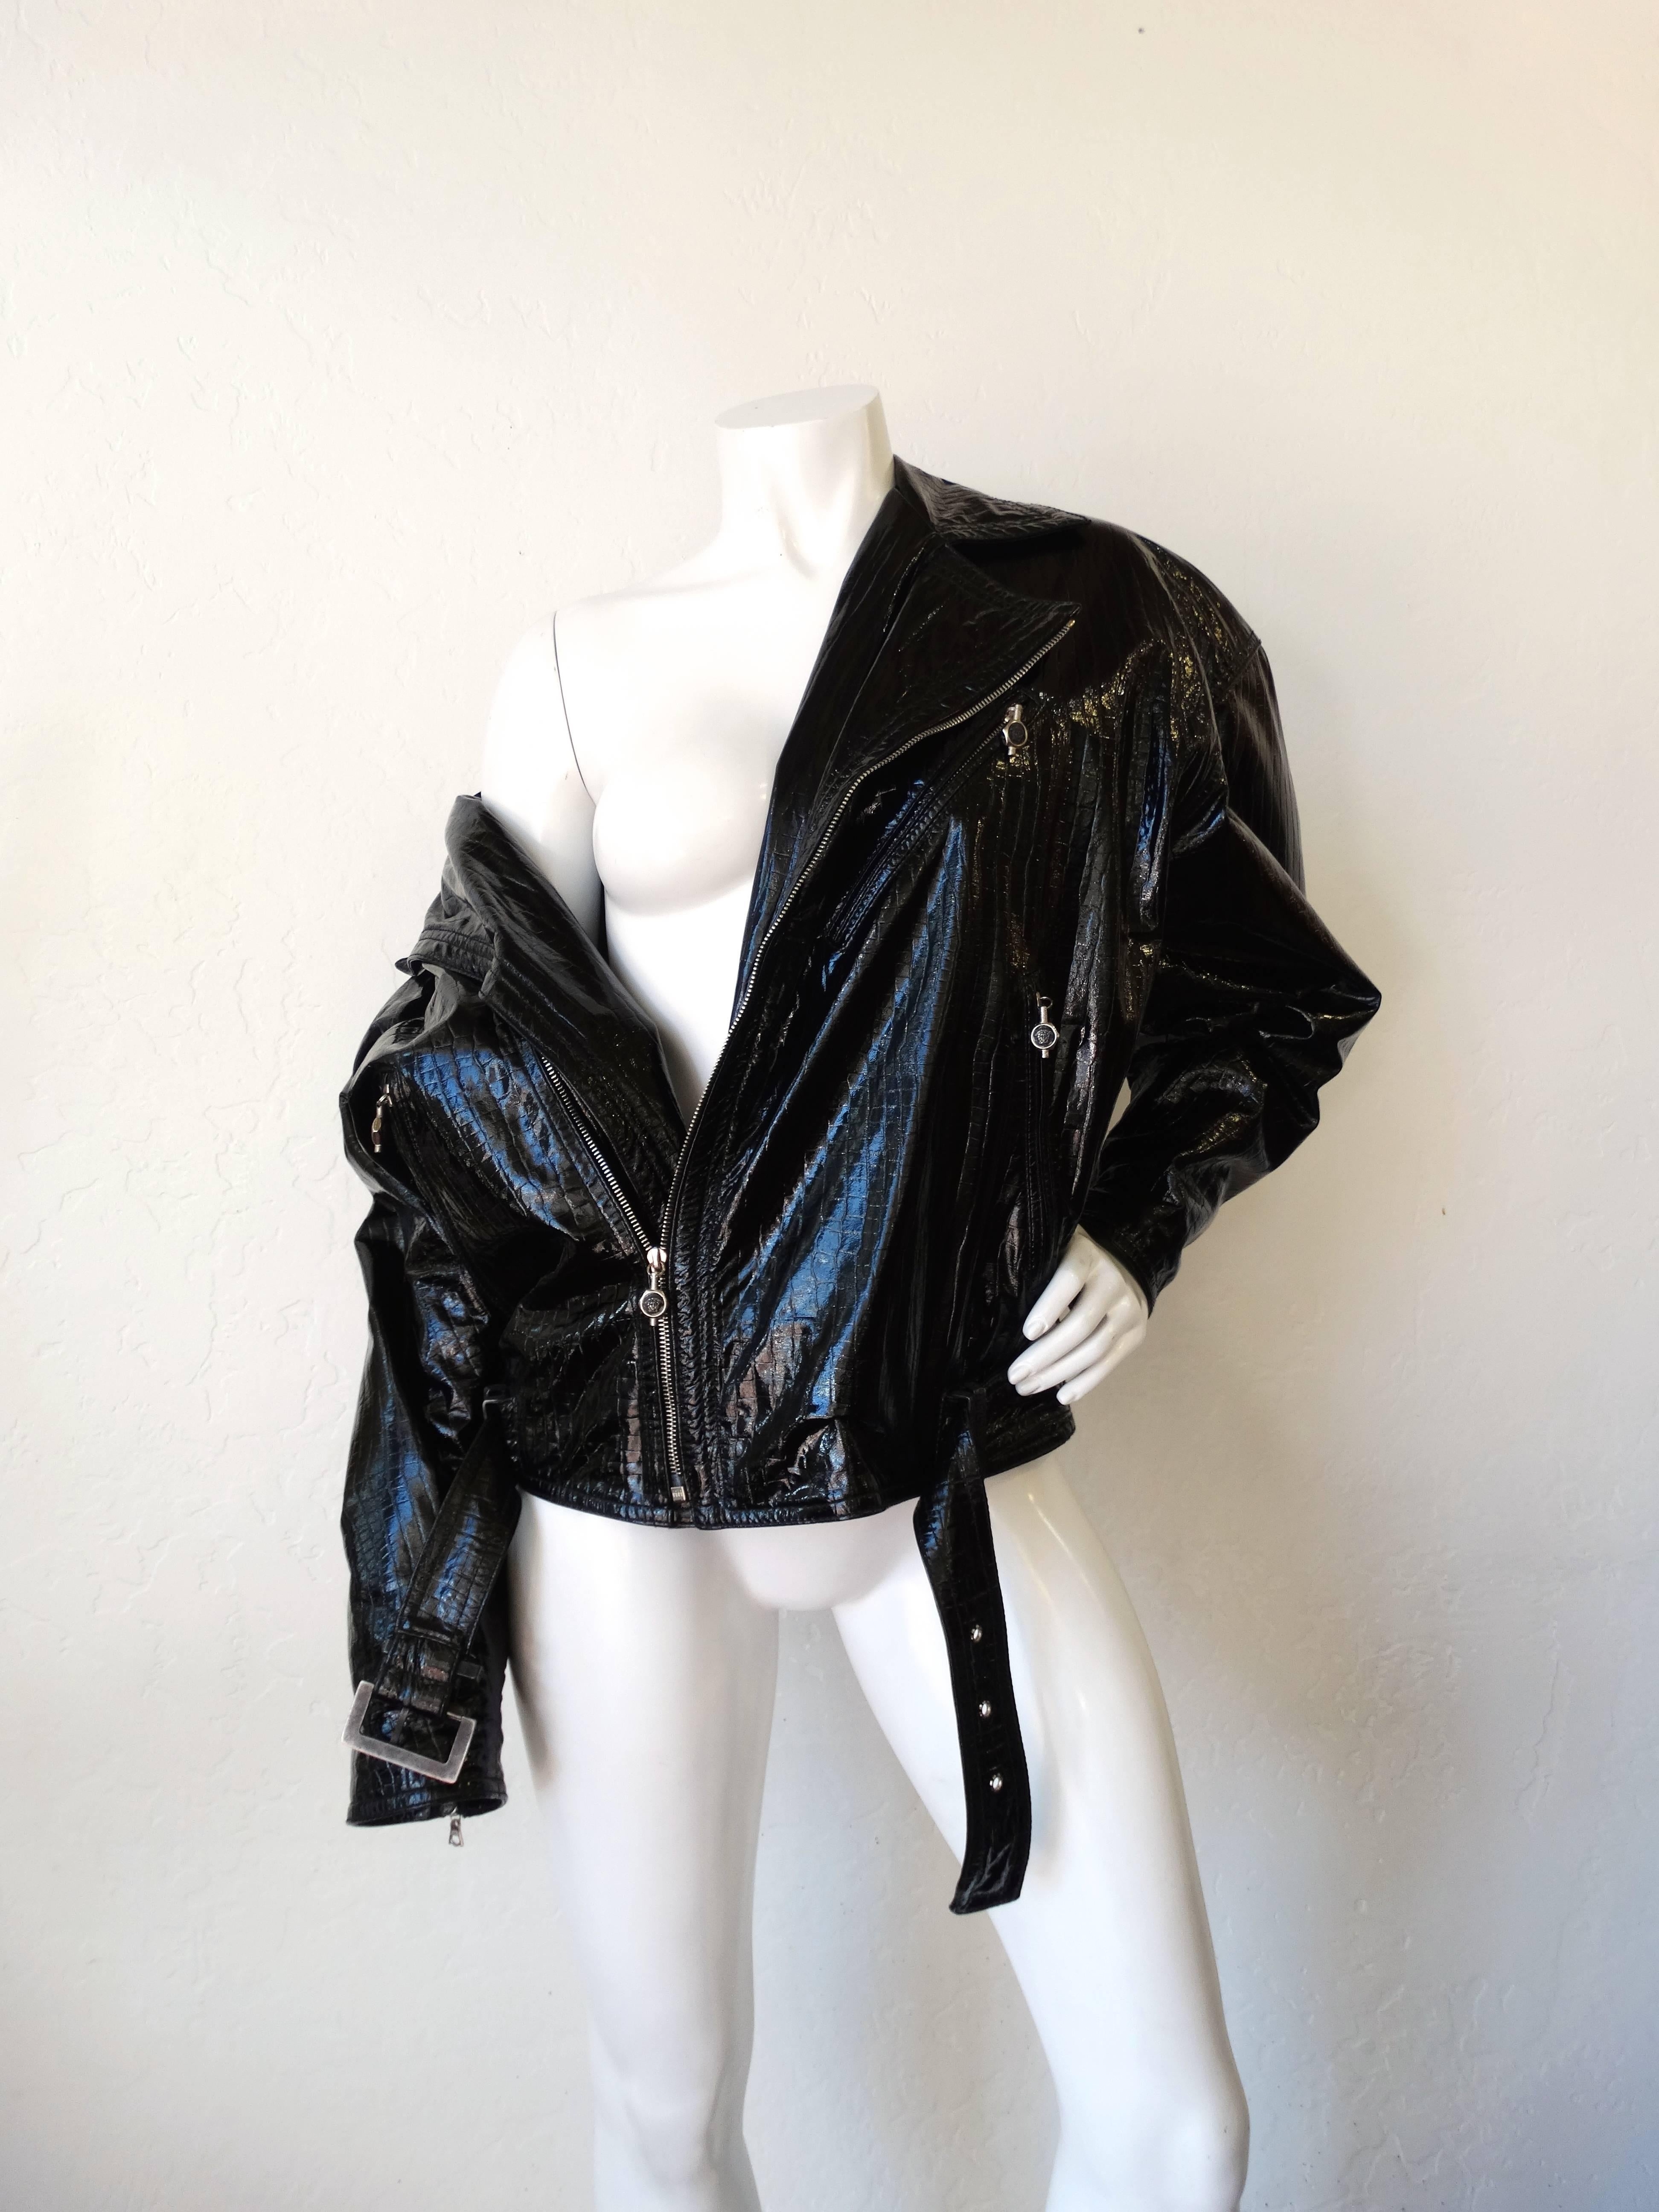 Score yourself an iconic piece of 1980s Versace with our incredible patent leather motorcycle jacket! Made of a super shiny, alligator embossed patent leather and lined with signature Versace medusa head print in gold rayon! Classic motorcycle